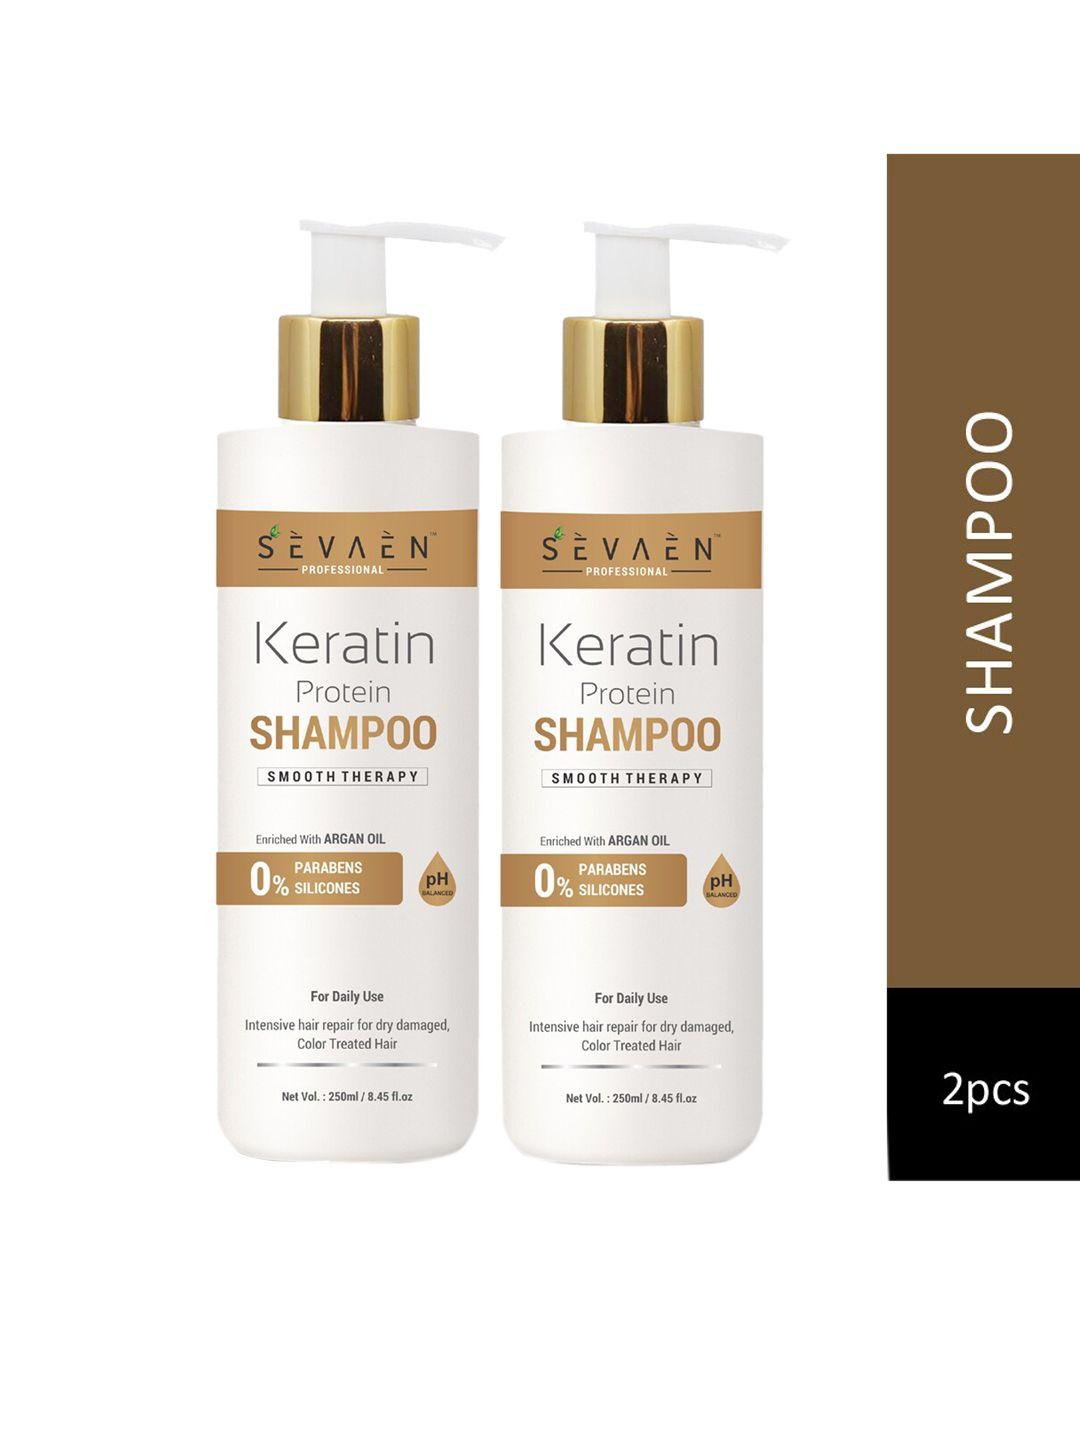 sevaen set of 2 smooth therapy keratin protein shampoos with argan oil - 250ml each